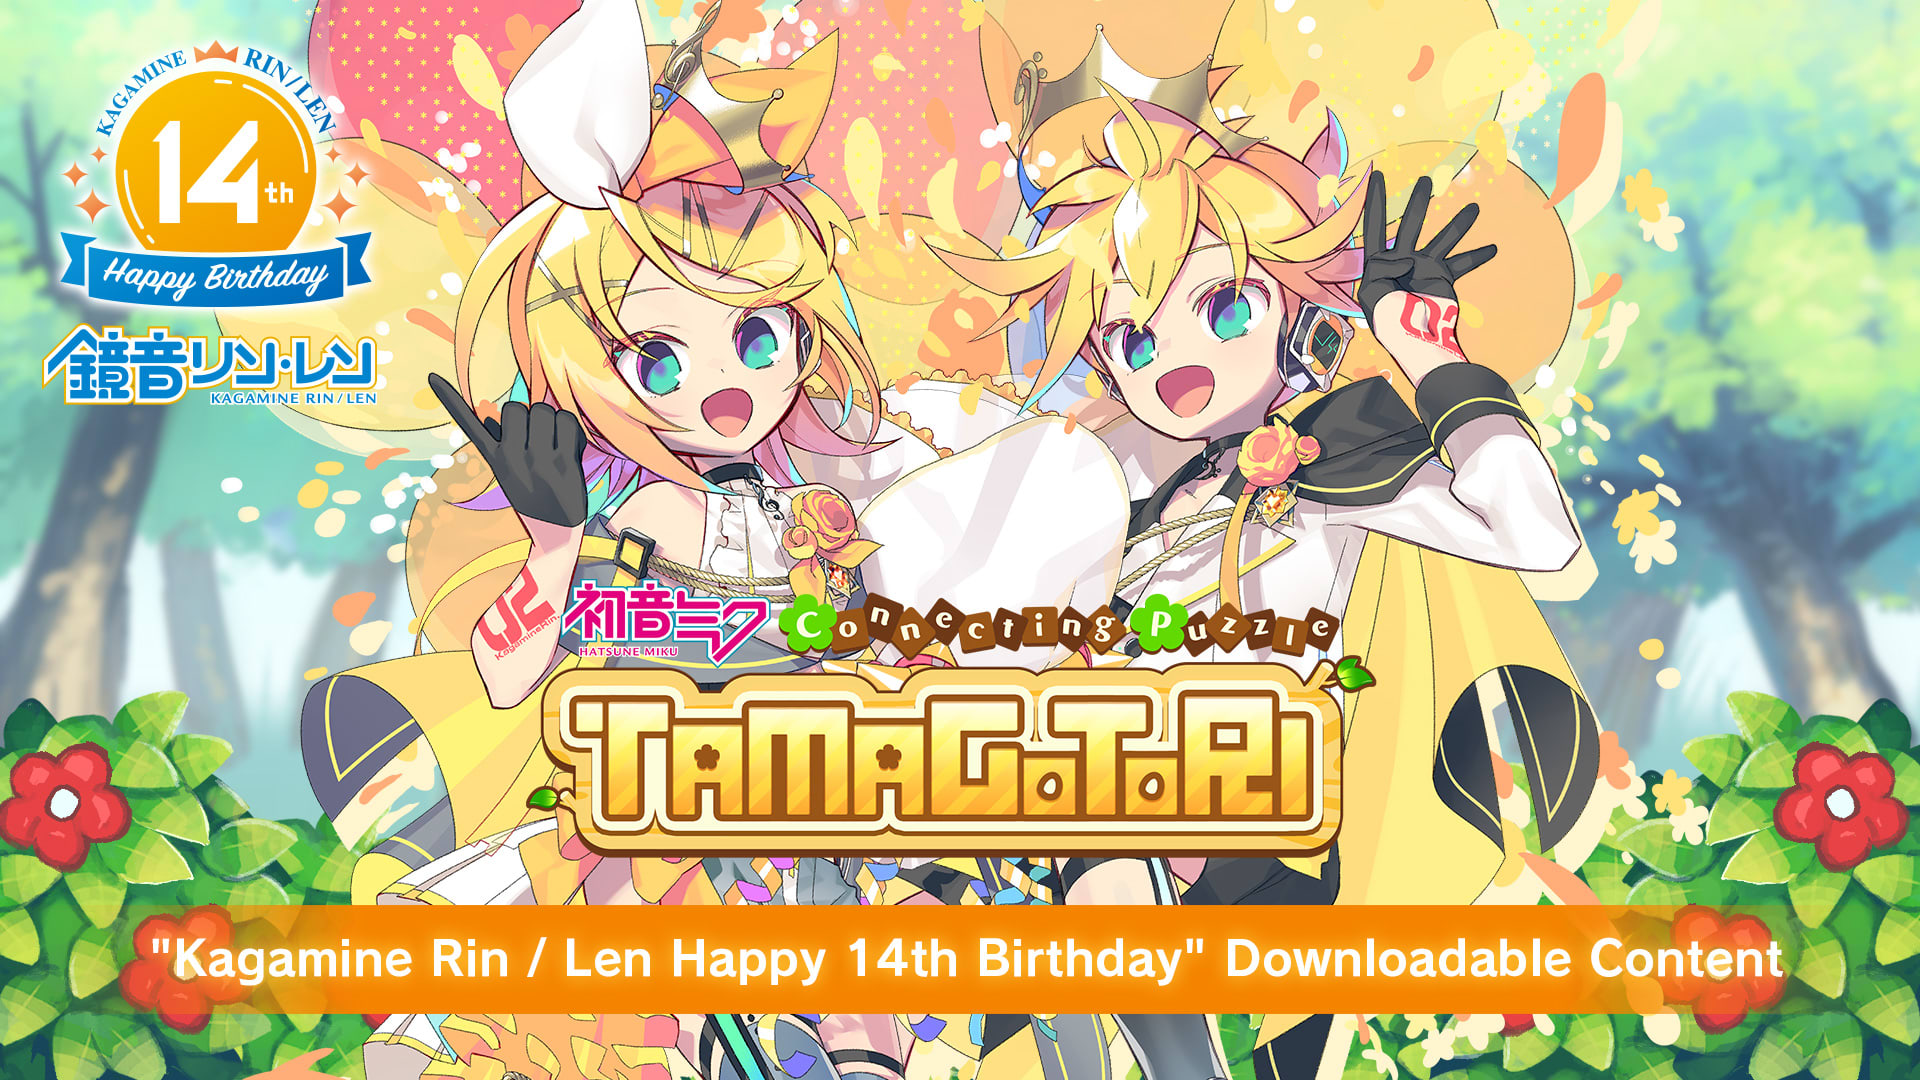 "Kagamine Rin / Len Happy 14th Birthday" Downloadable Content